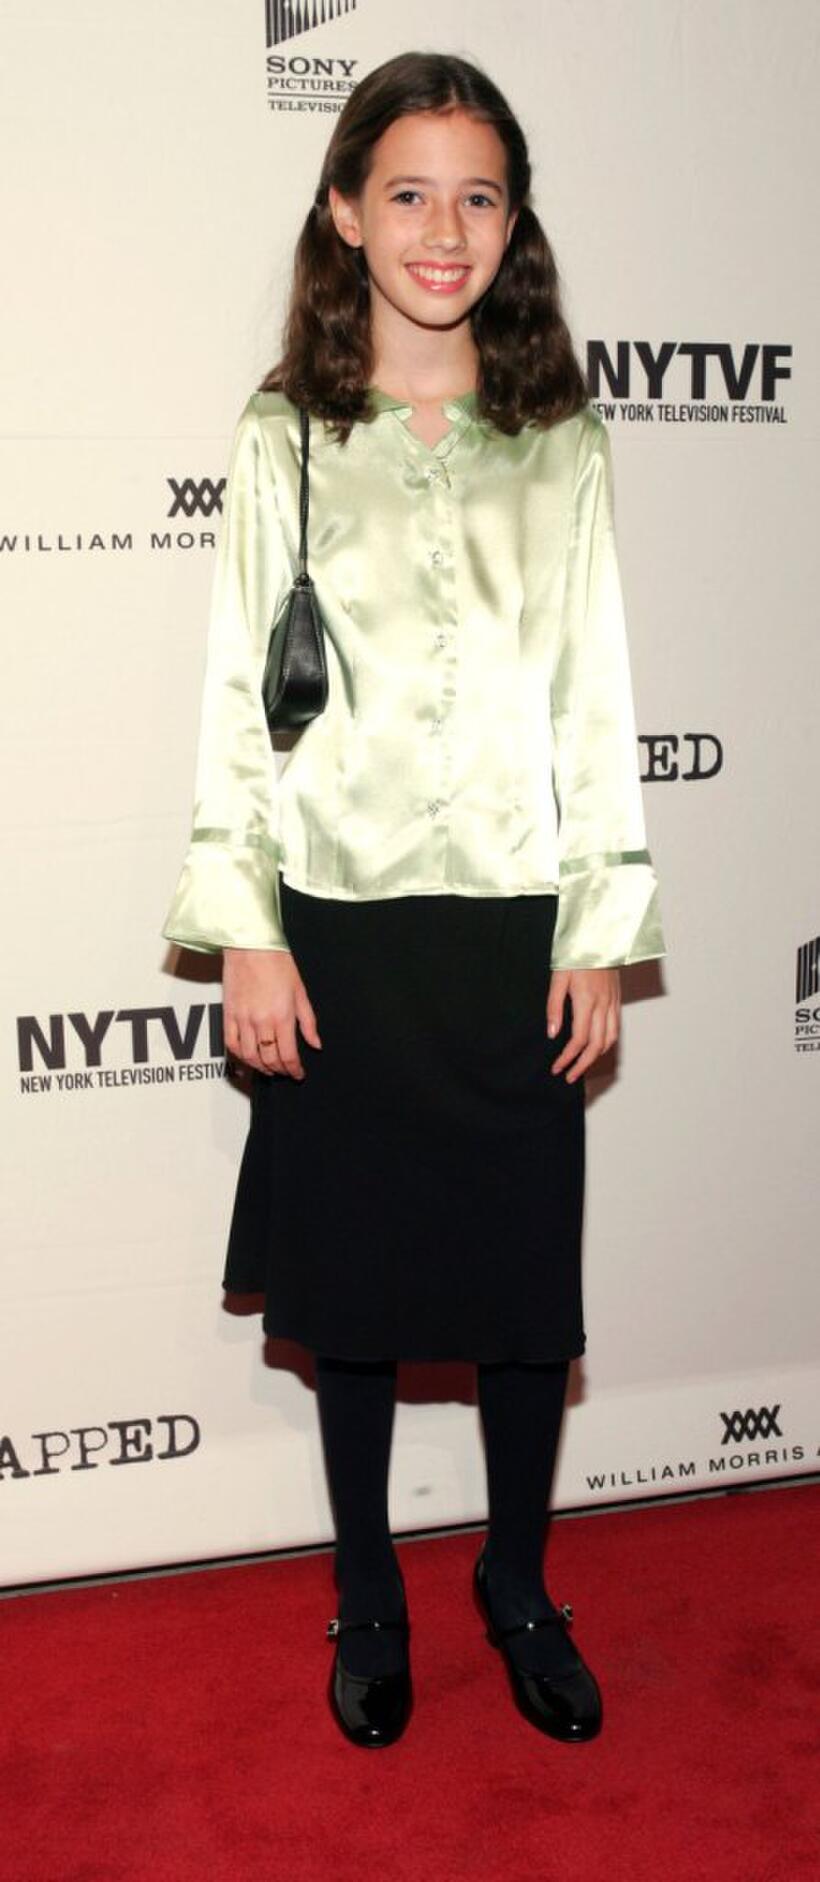 Lydia Jordan at the New York Television Festival opening night gala during the premiere screening of "Kidnapped and Made In NY."